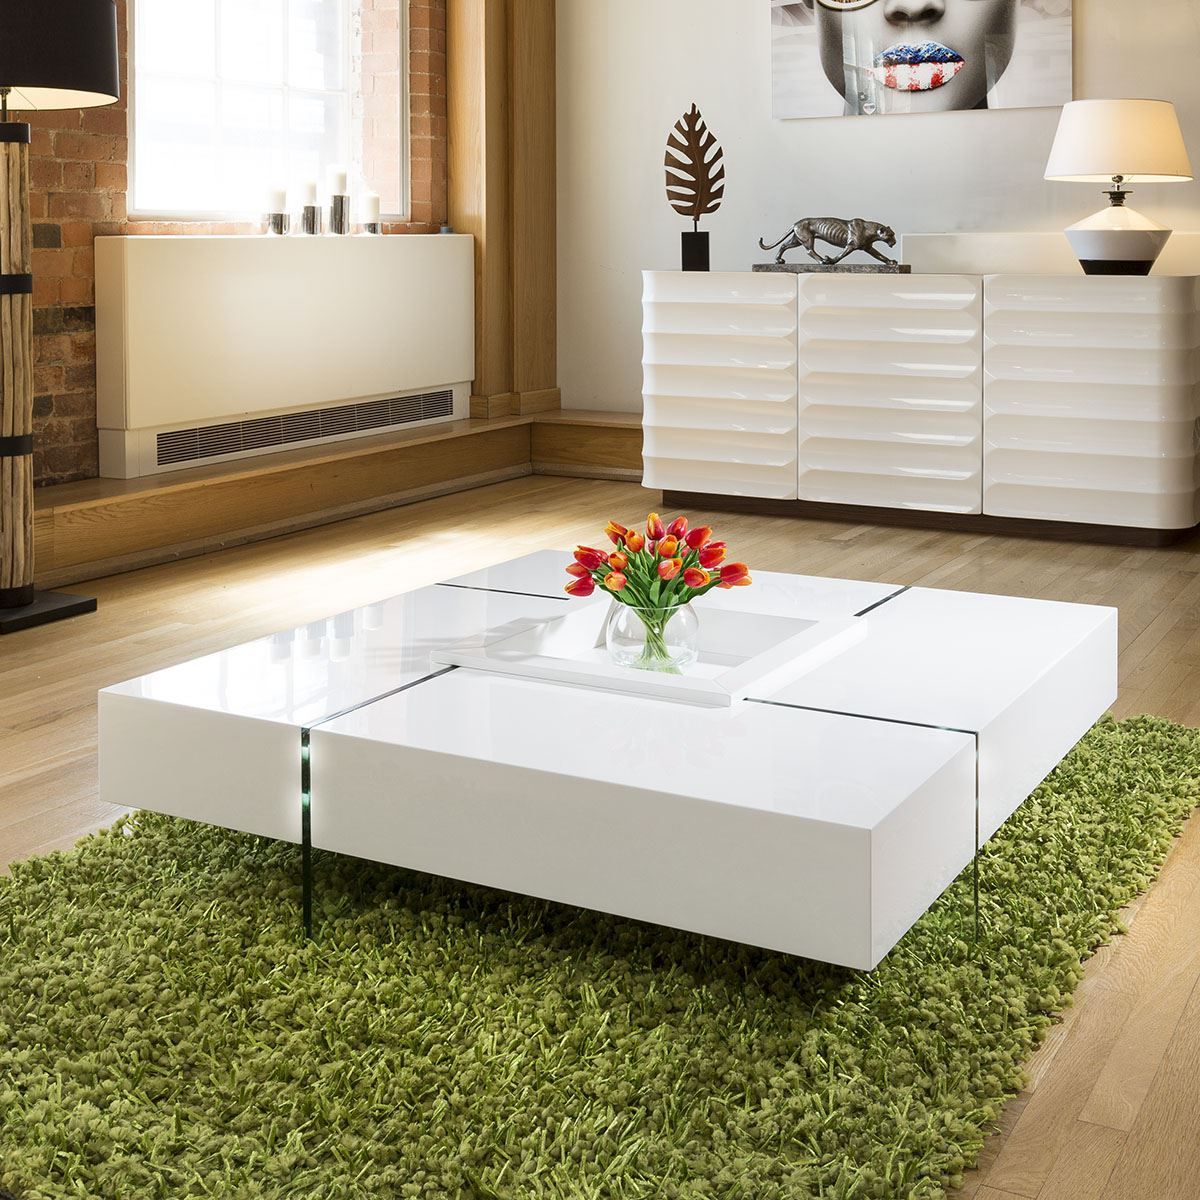 Quatropi Modern Large White Gloss Coffee Table 1194mm For Popular White Triangular Coffee Tables (Gallery 18 of 20)